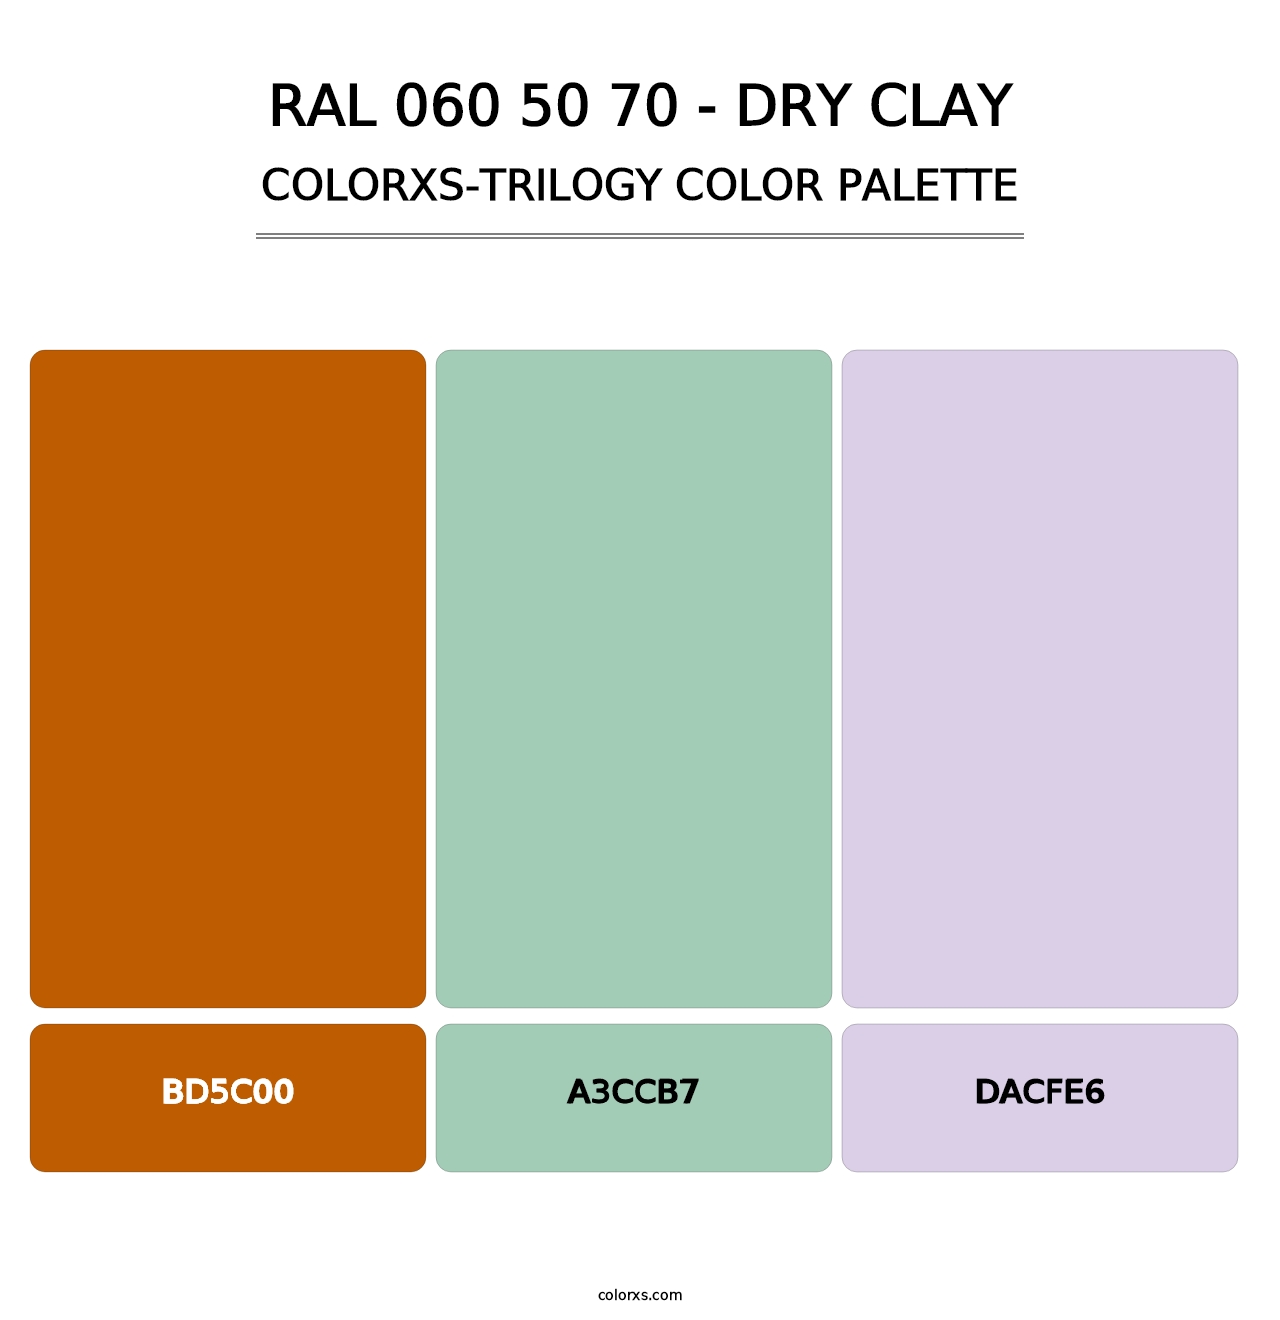 RAL 060 50 70 - Dry Clay - Colorxs Trilogy Palette